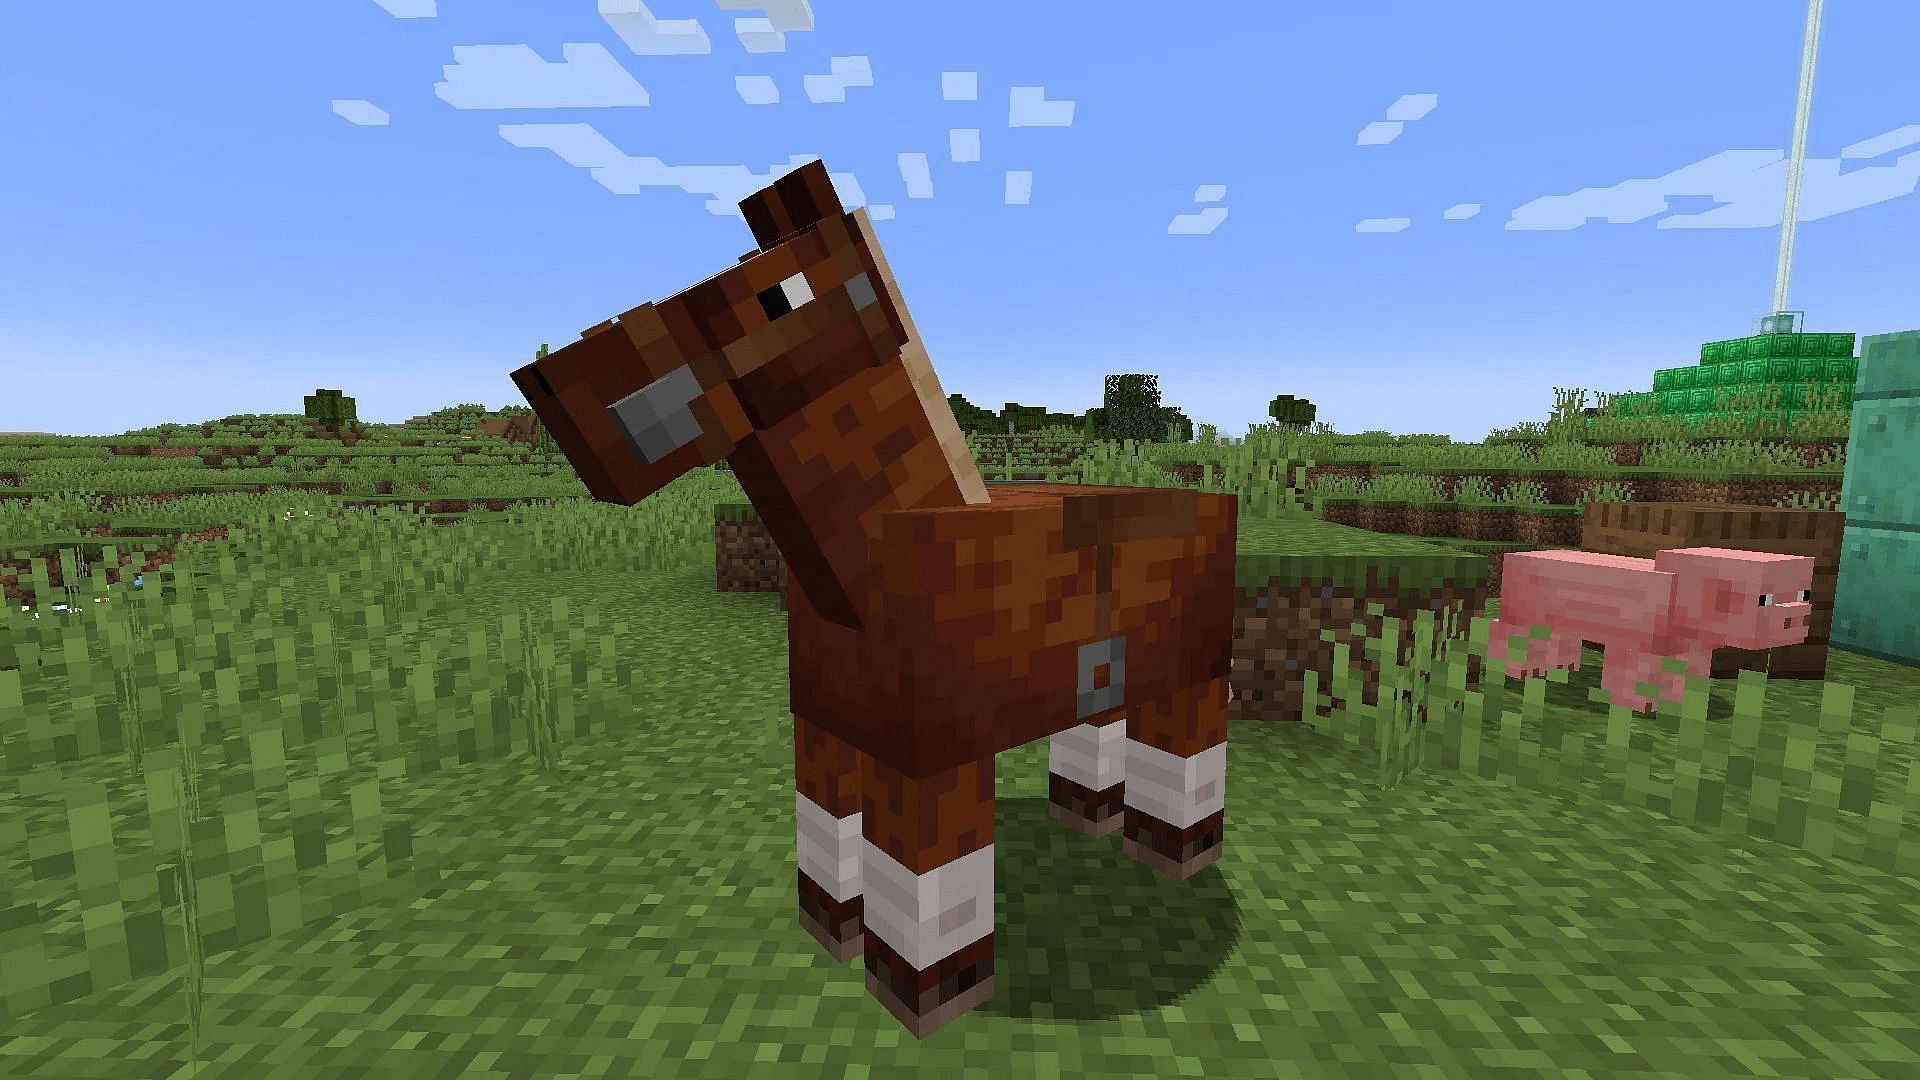 A standard breed of horse in Minecraft (Image via Mojang)